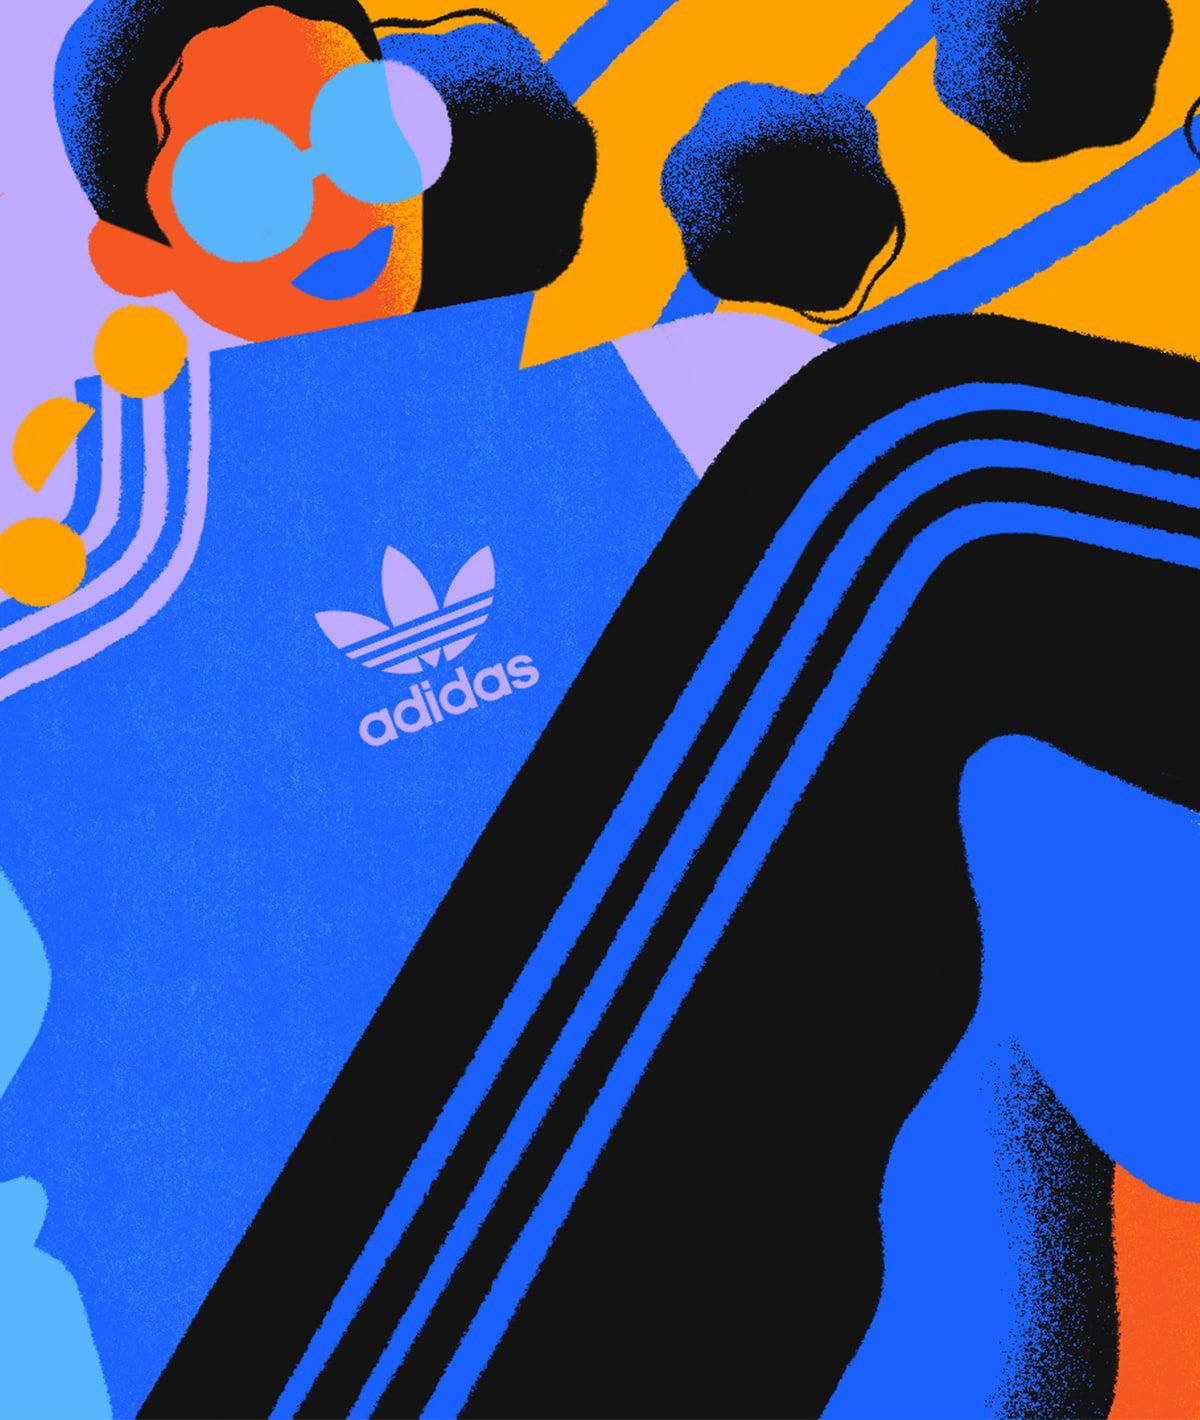 A colorful illustration of a person wearing an Adidas shirt. - Adidas